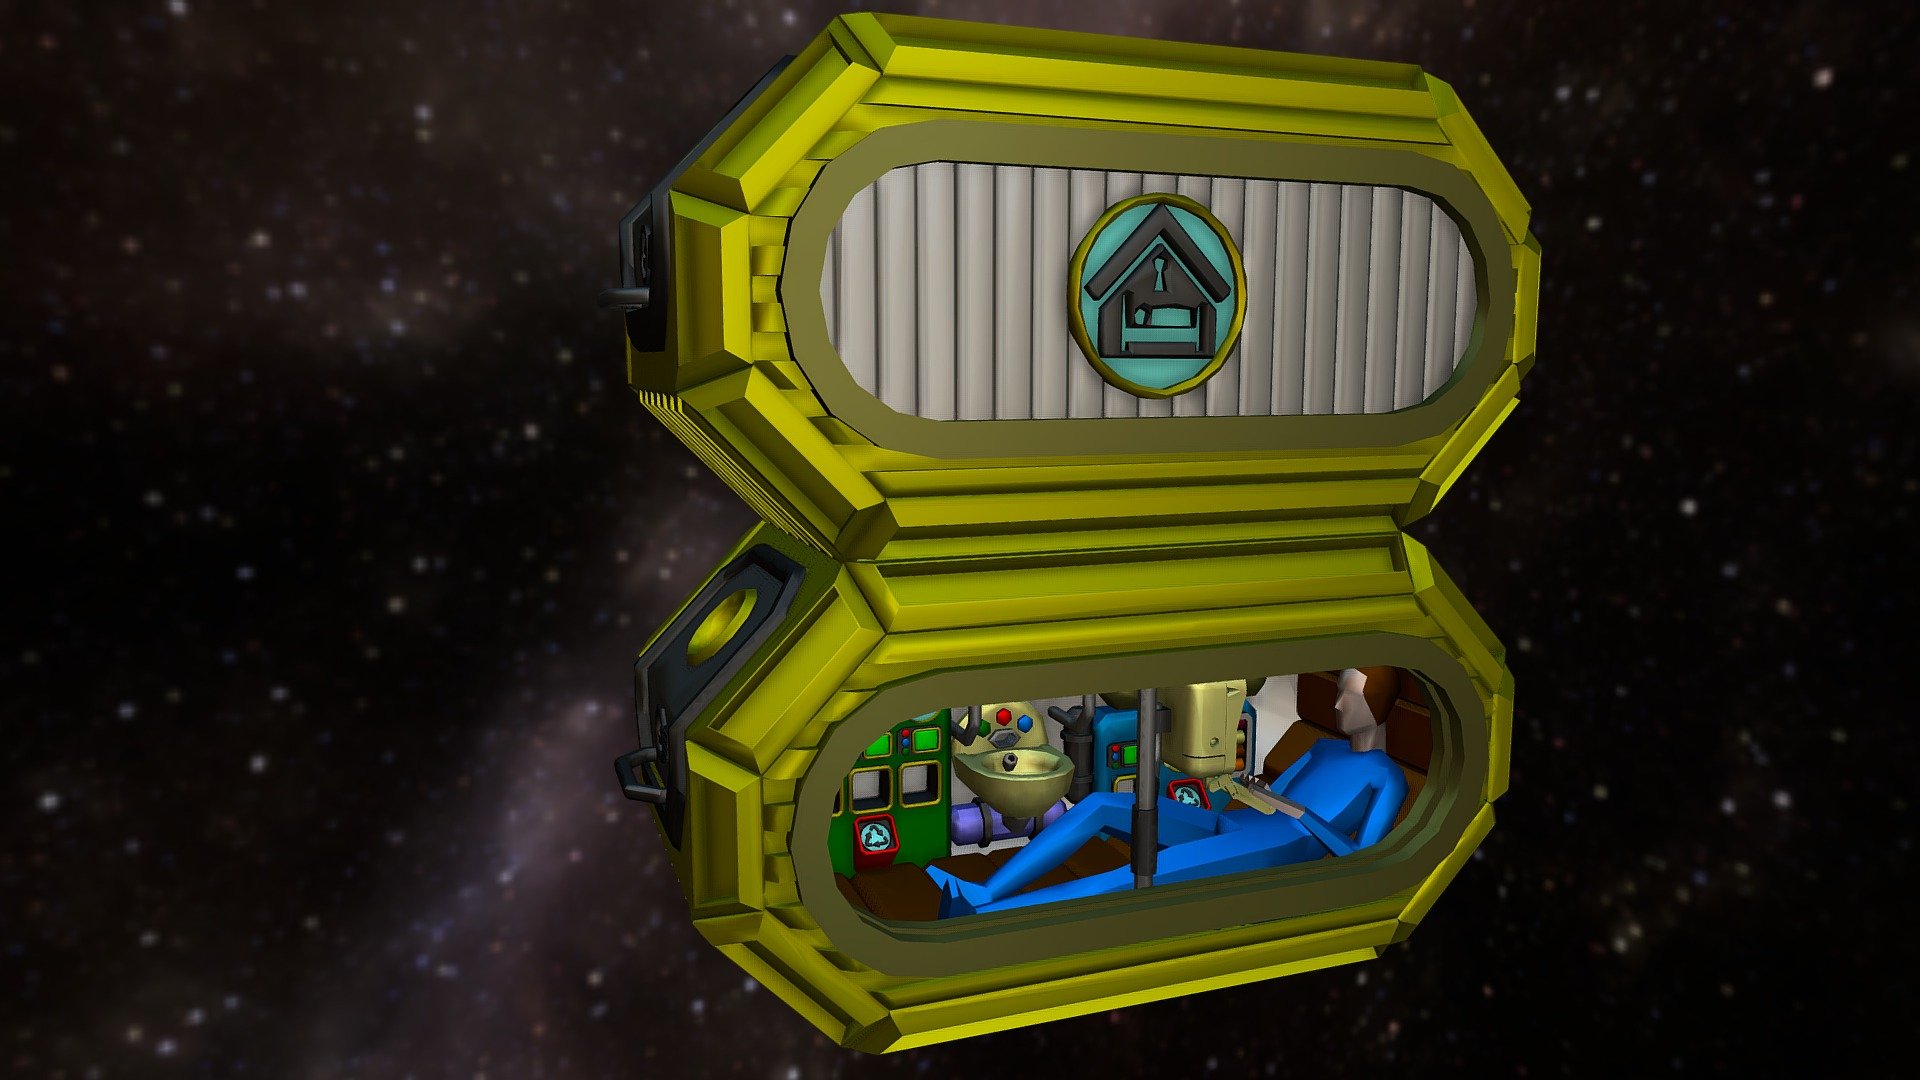 CARGO COMMODITIES [HAB-PODS]